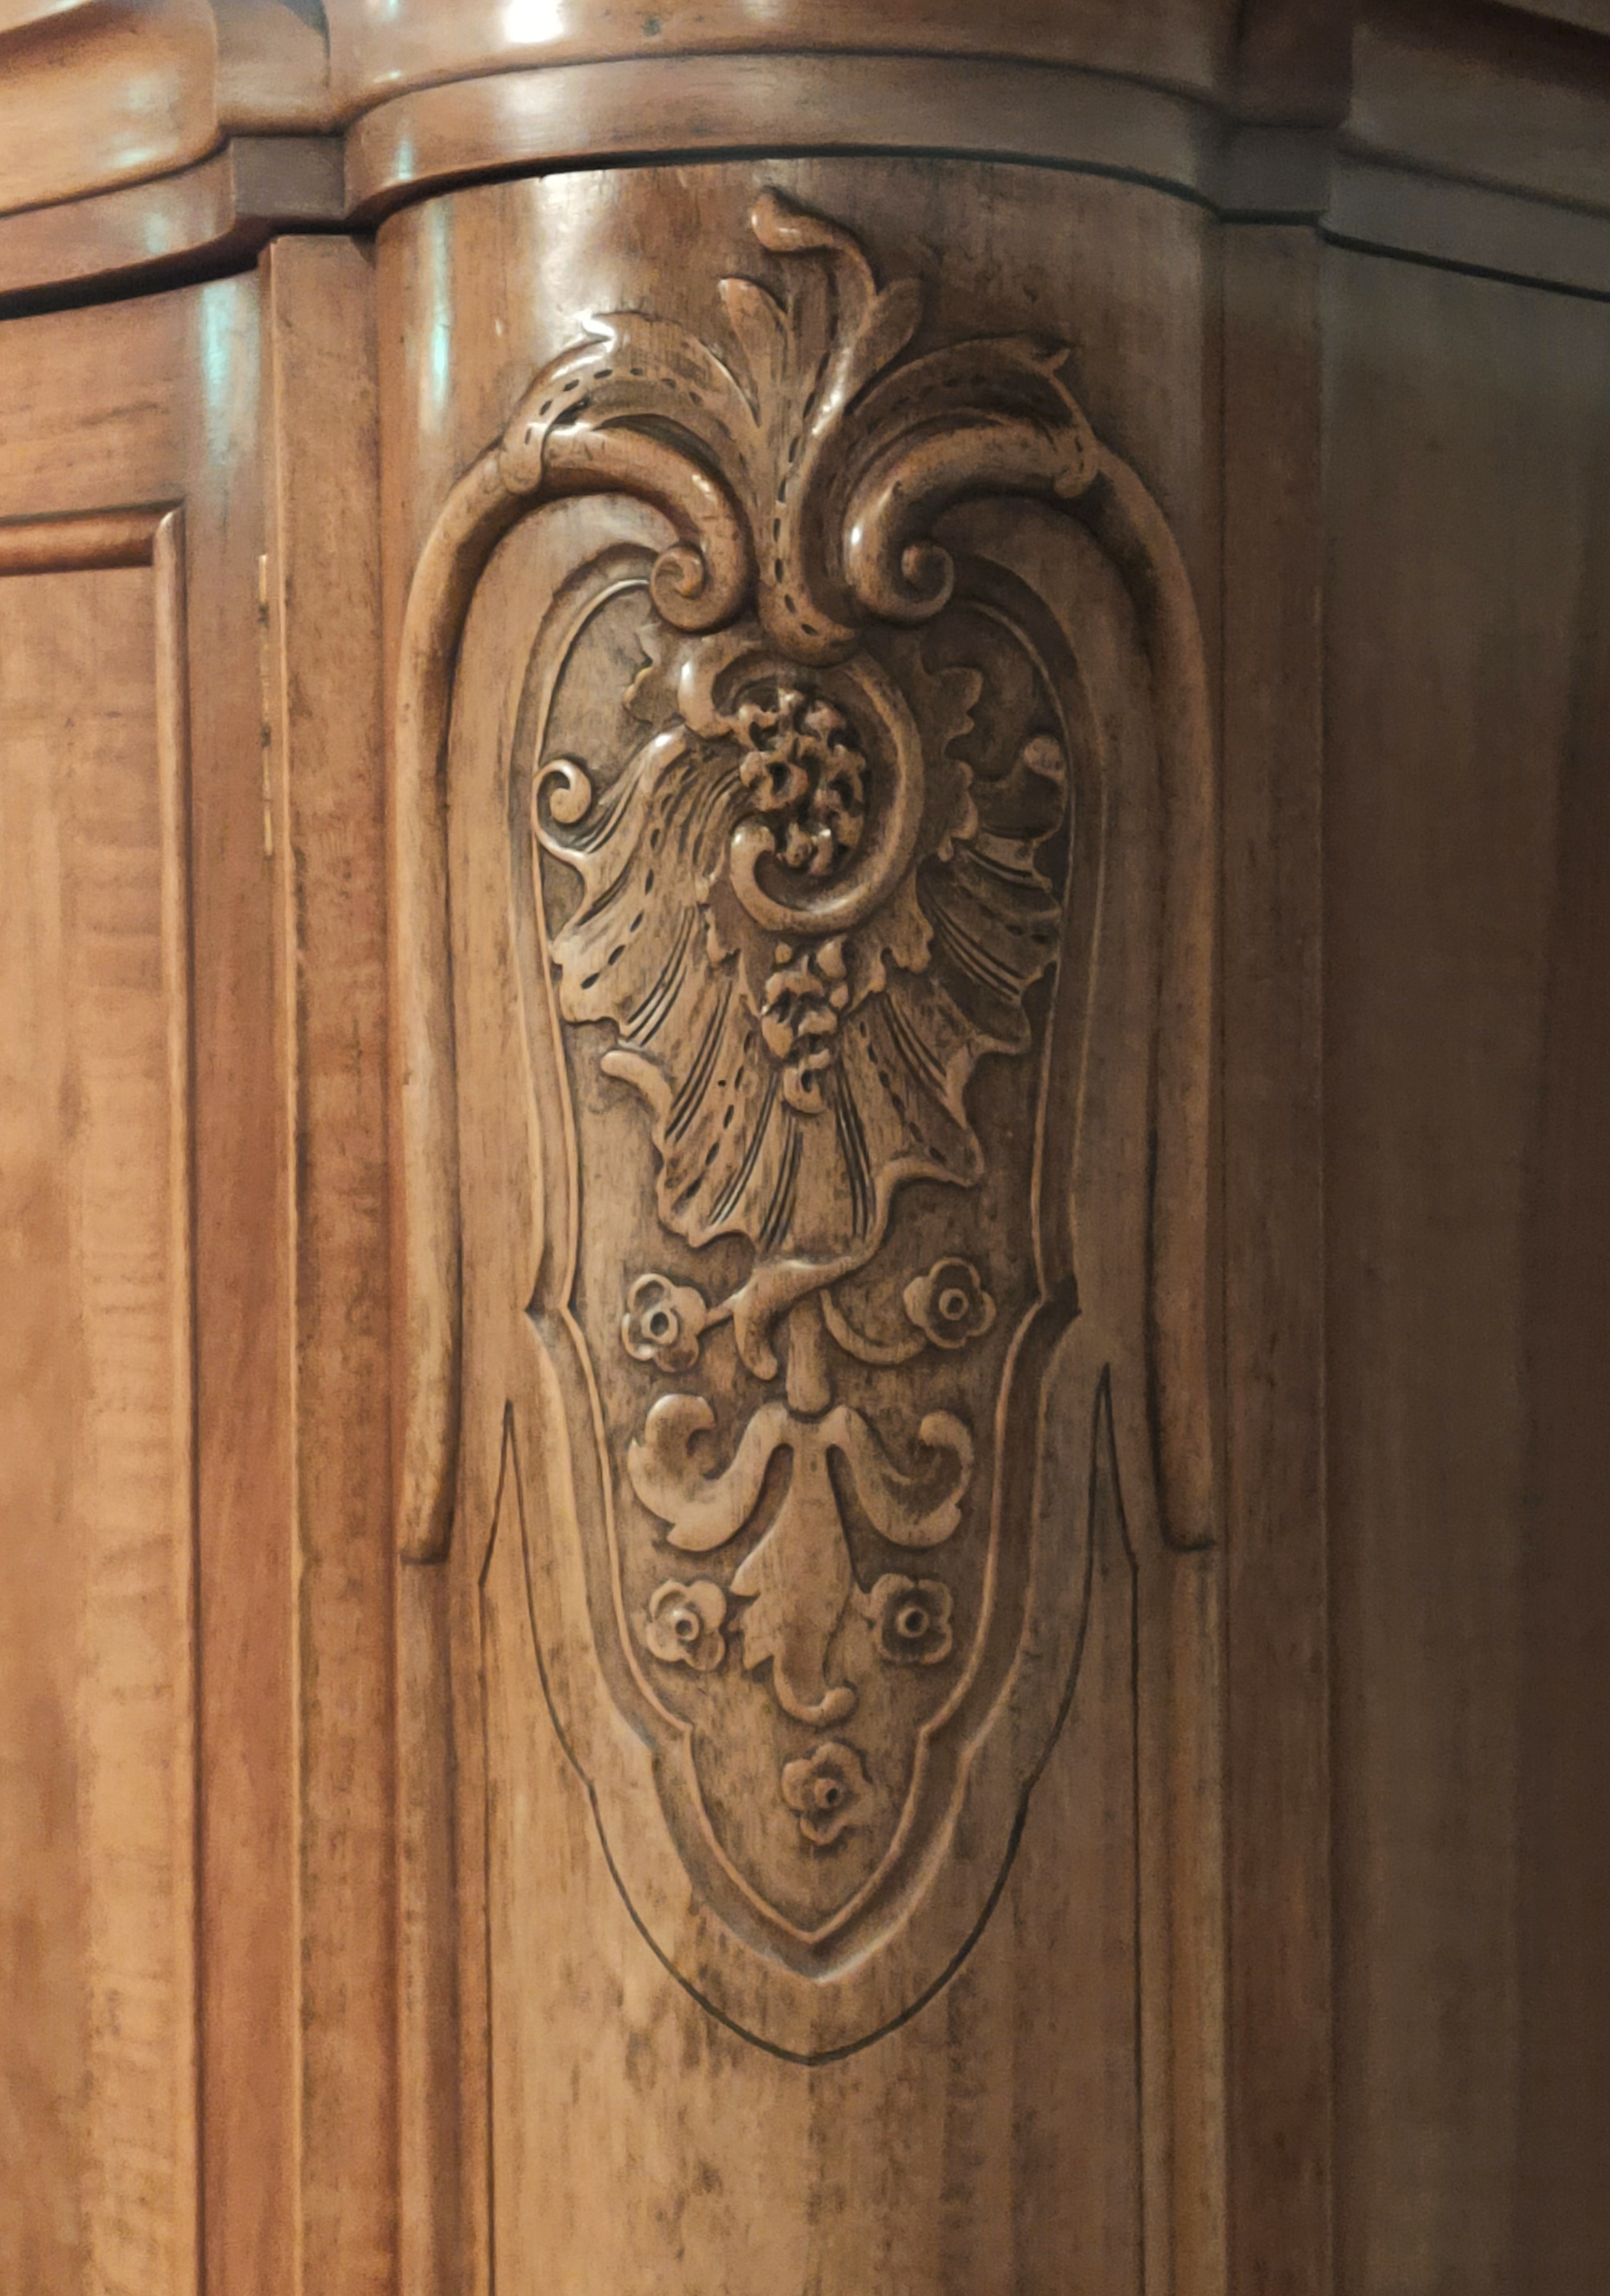 Whytock & Reid Walnut Wardrobe - built for Coco Chanel in Rosehall 1926 - Image 8 of 14